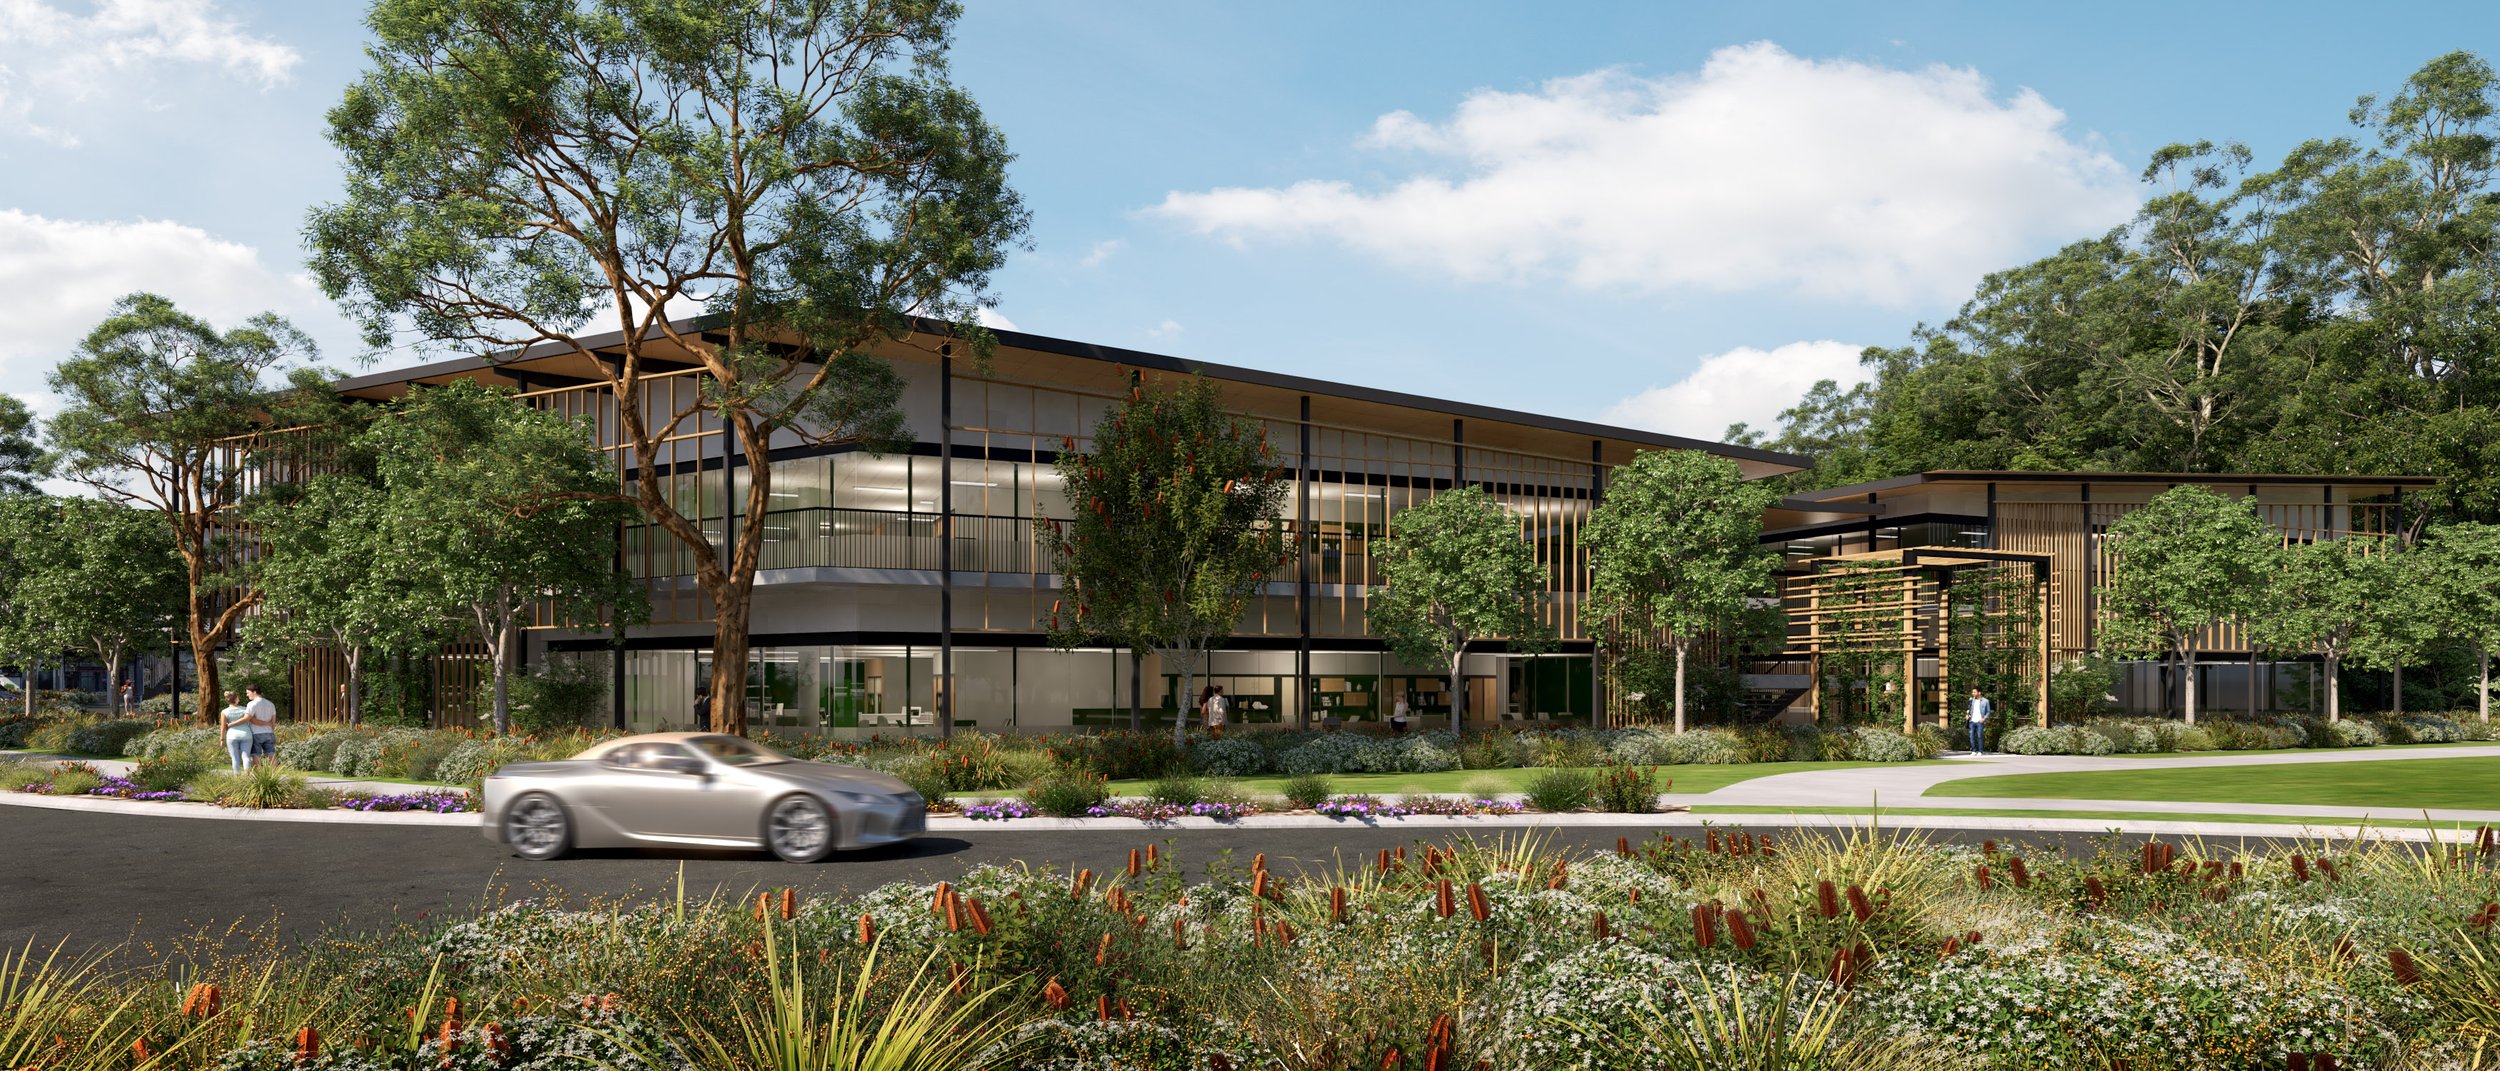 Image 3 - Stockwell - Noosa Civic - Commercial_Gateway.jpg